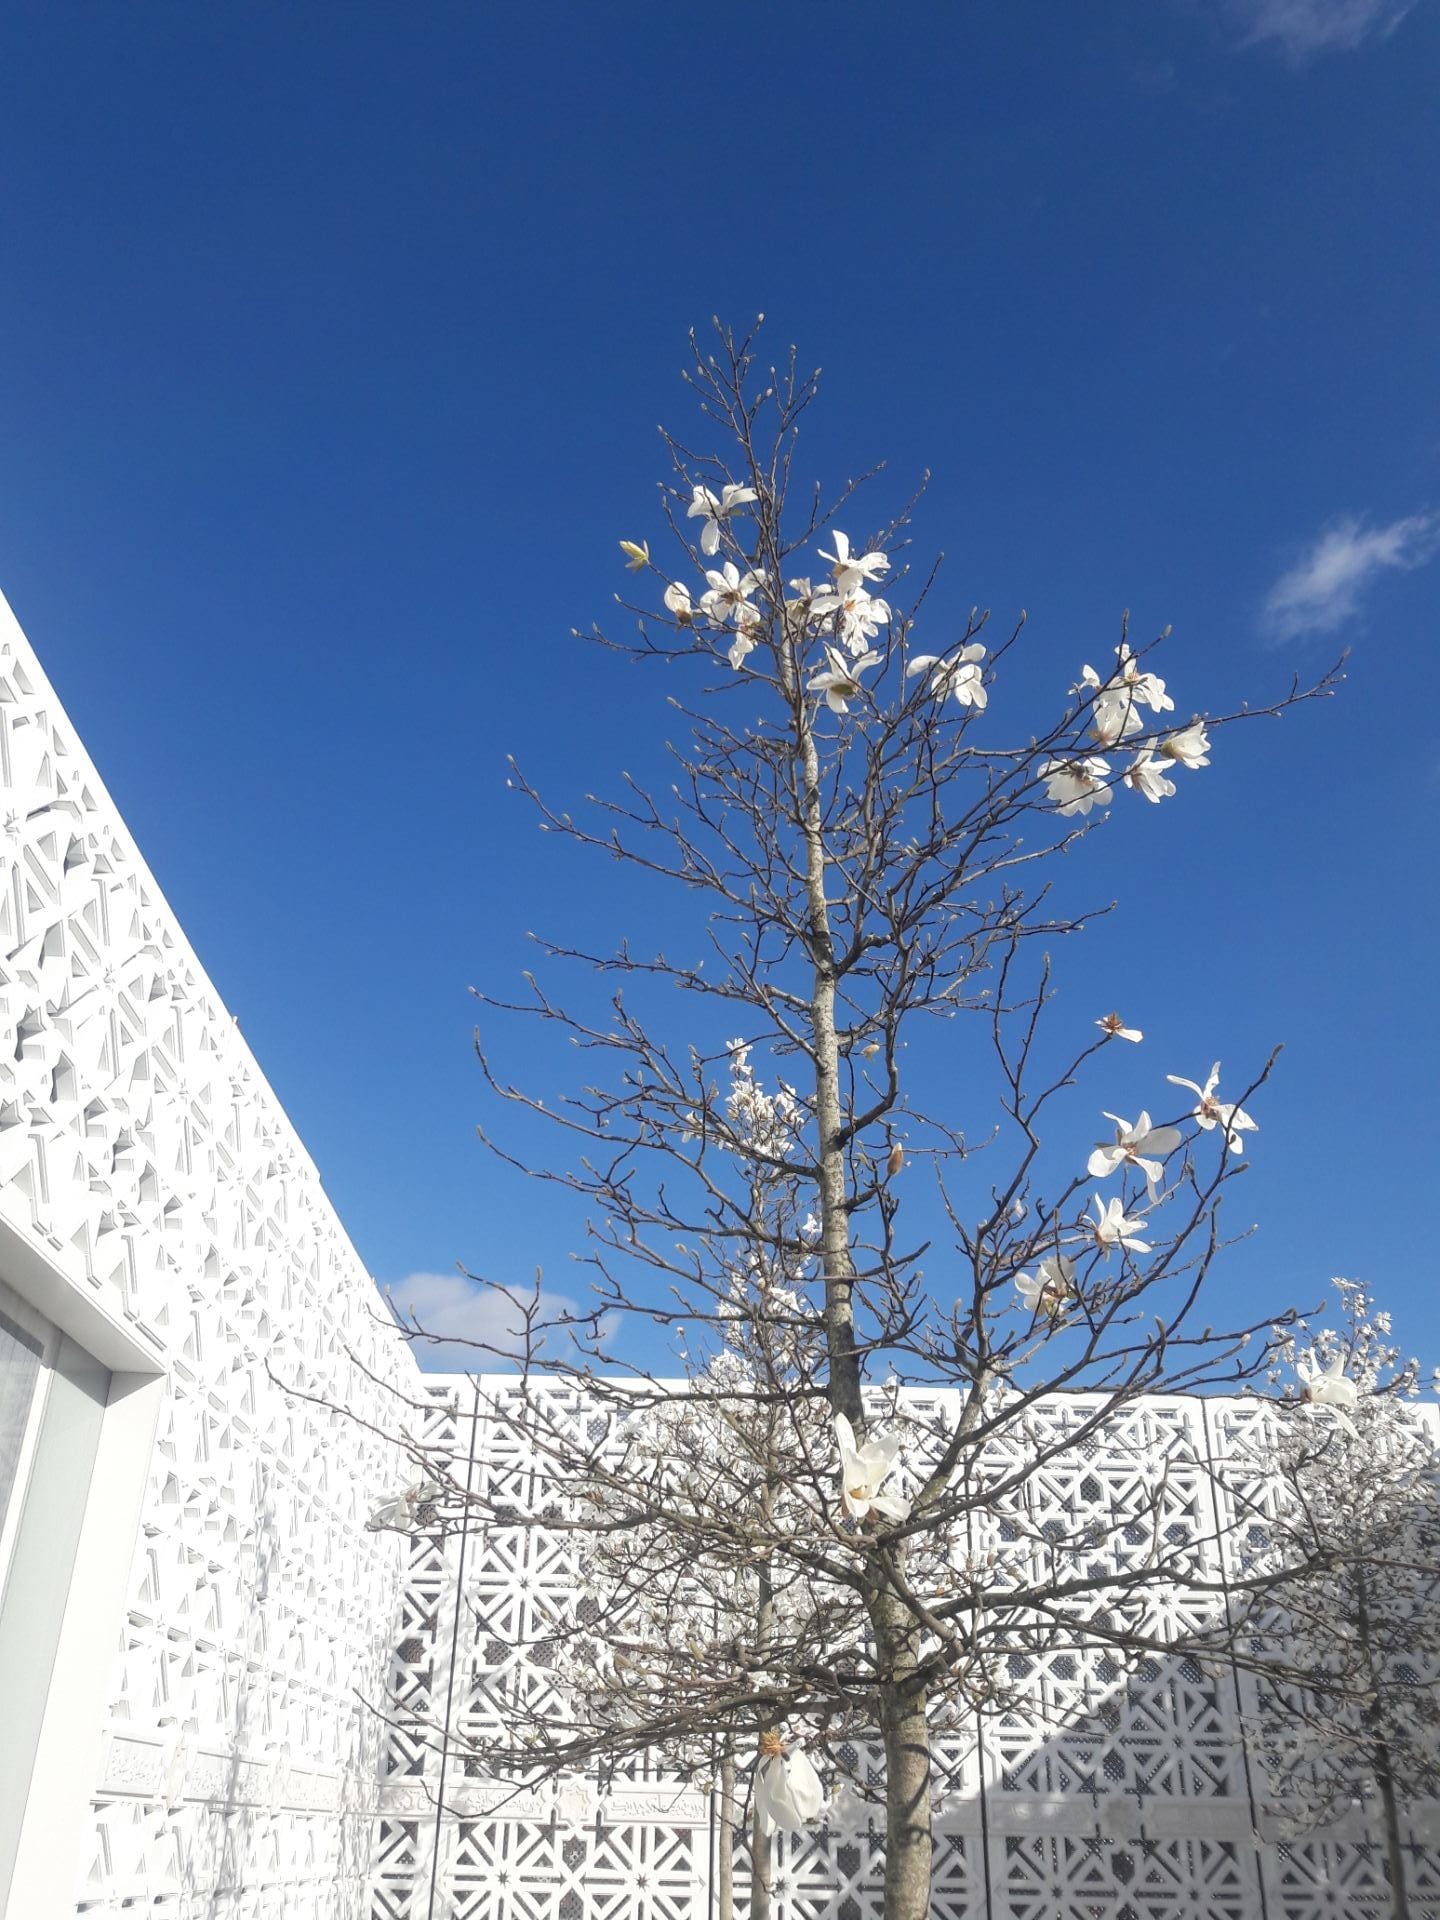  The Garden of Light small tree with white blooms against a blue sky with white decorative trellis in the background.